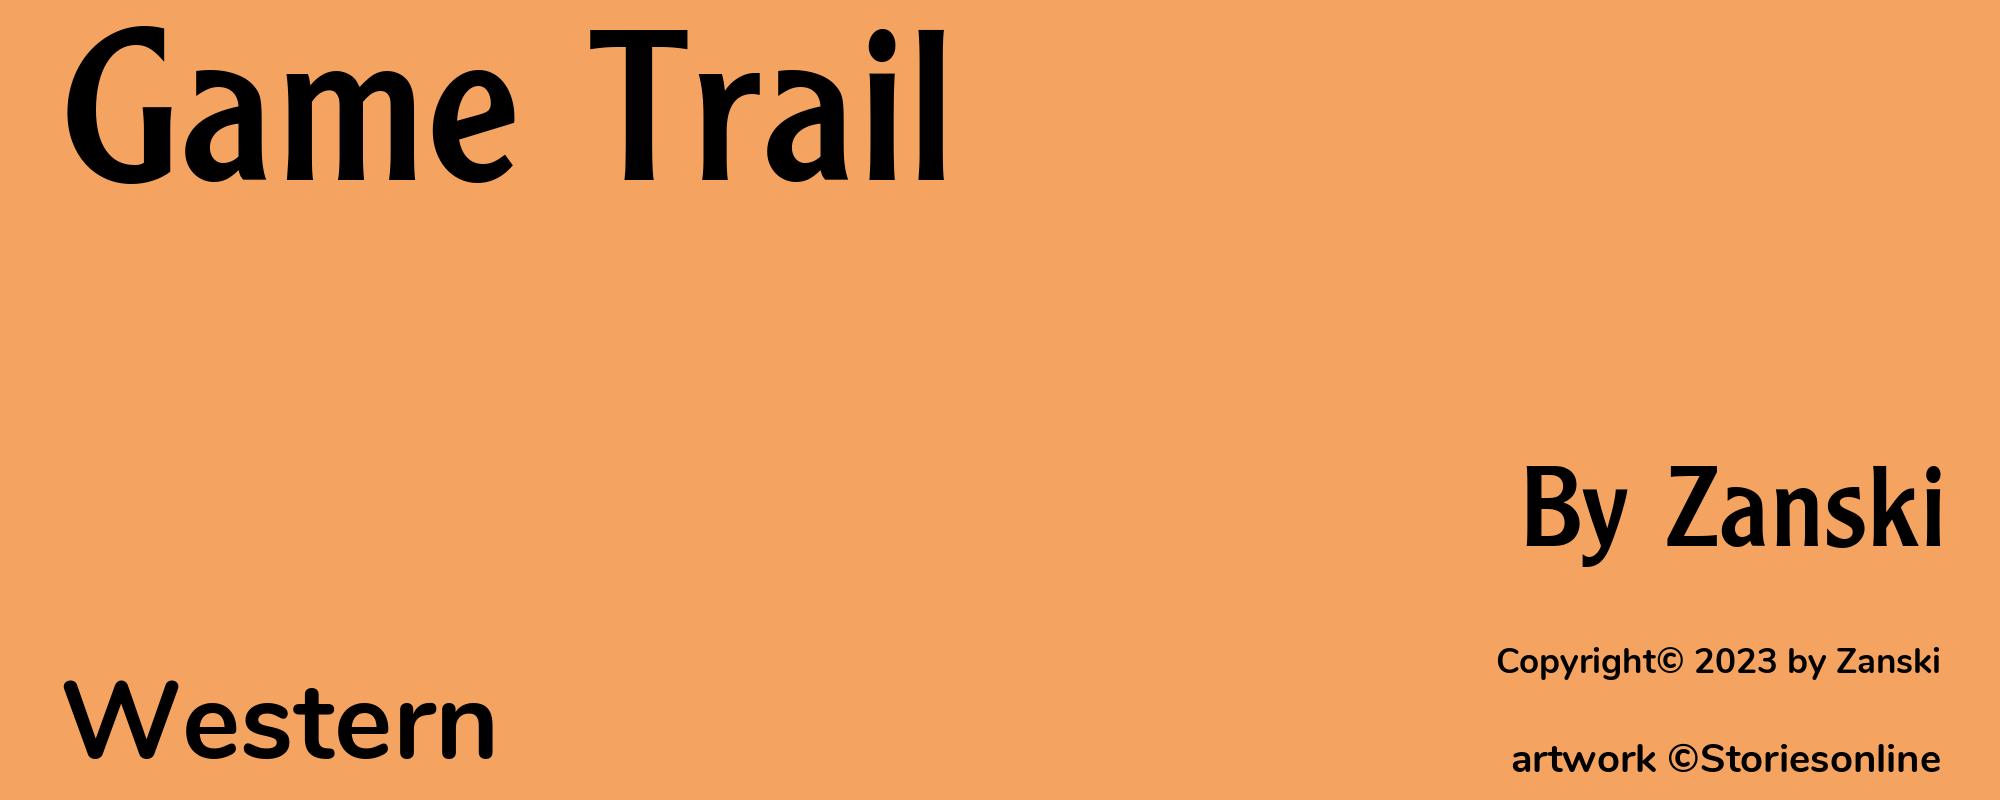 Game Trail - Cover